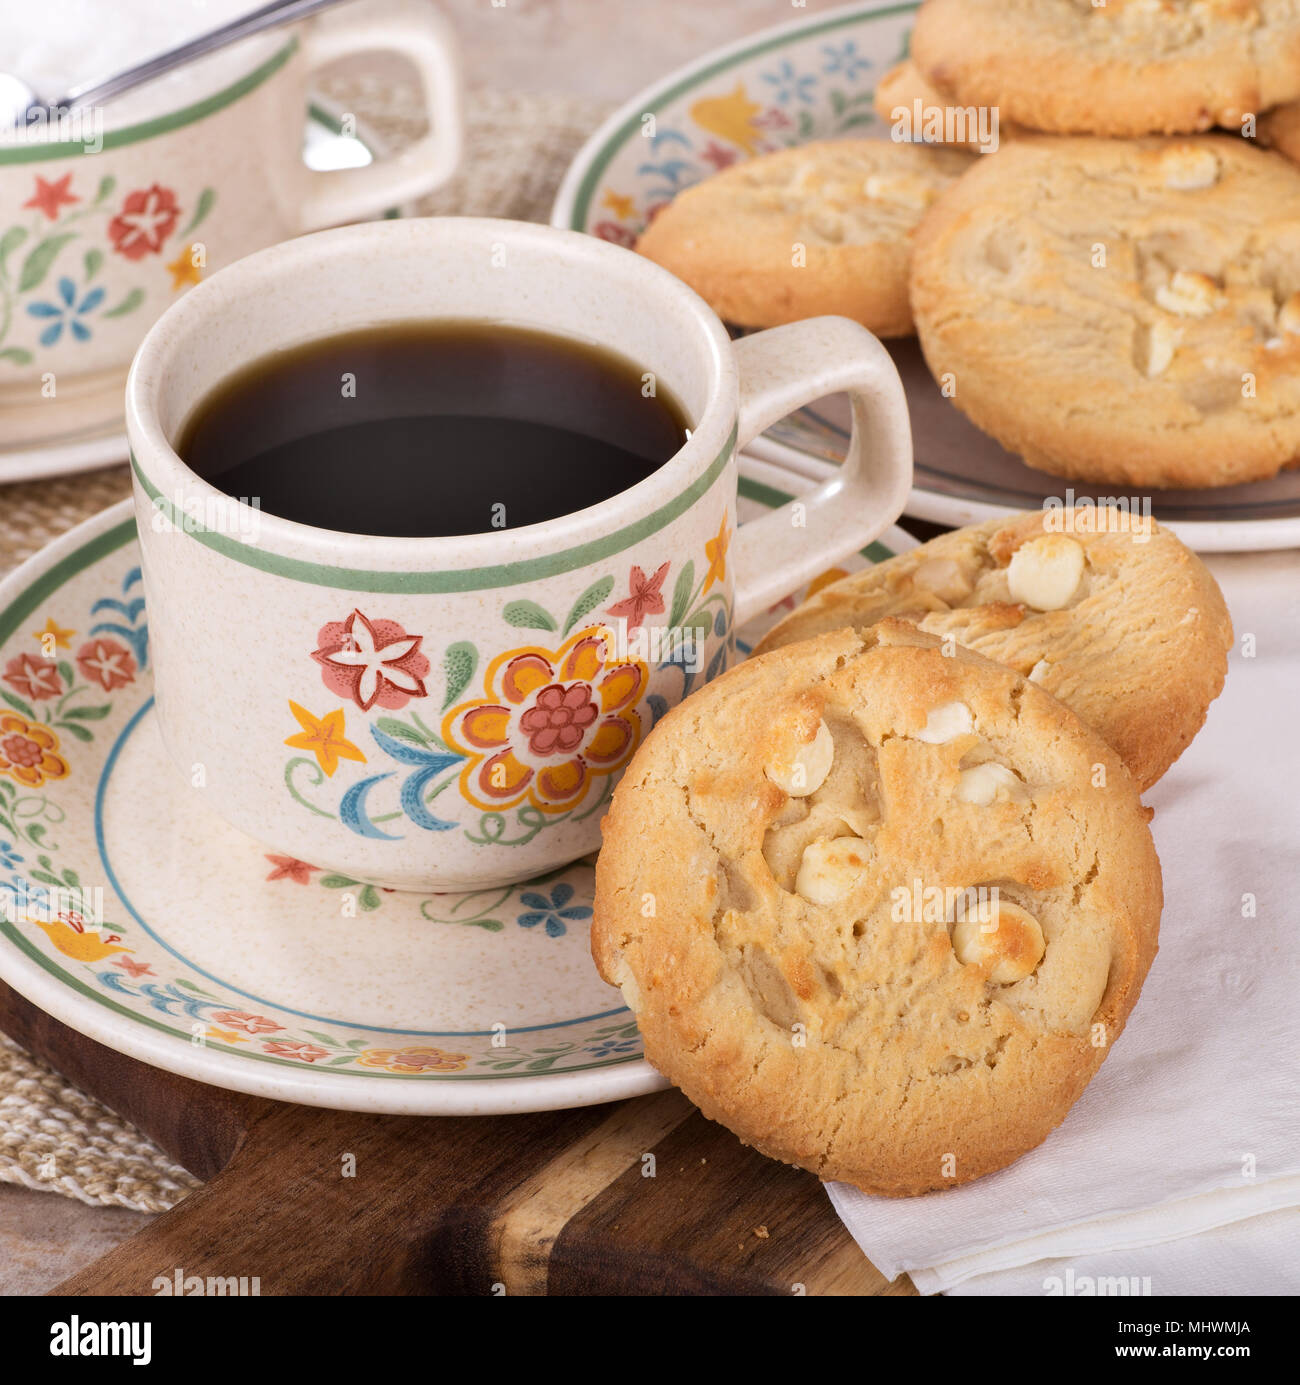 White chocolate macadamia cookies and cup of coffee on a plate with a plate of cookies and bowl of sugar in background Stock Photo